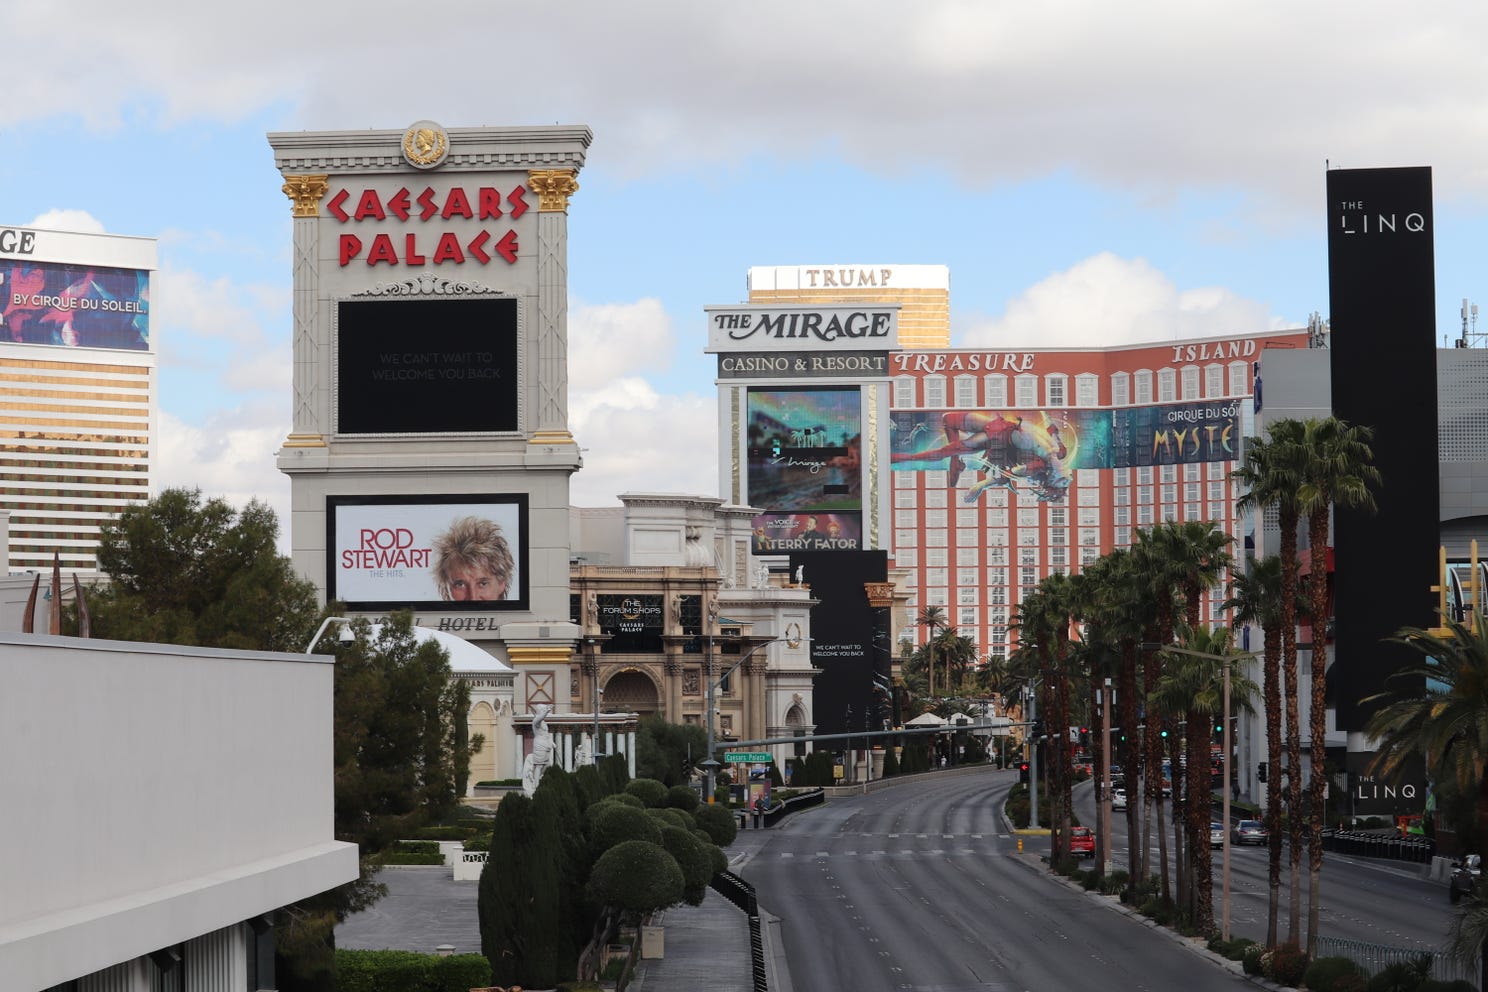 After the statewide shutdown of Nevada casinos to stem the spread of COVID-19, the Las Vegas Strip sat empty on March 20, 2020.